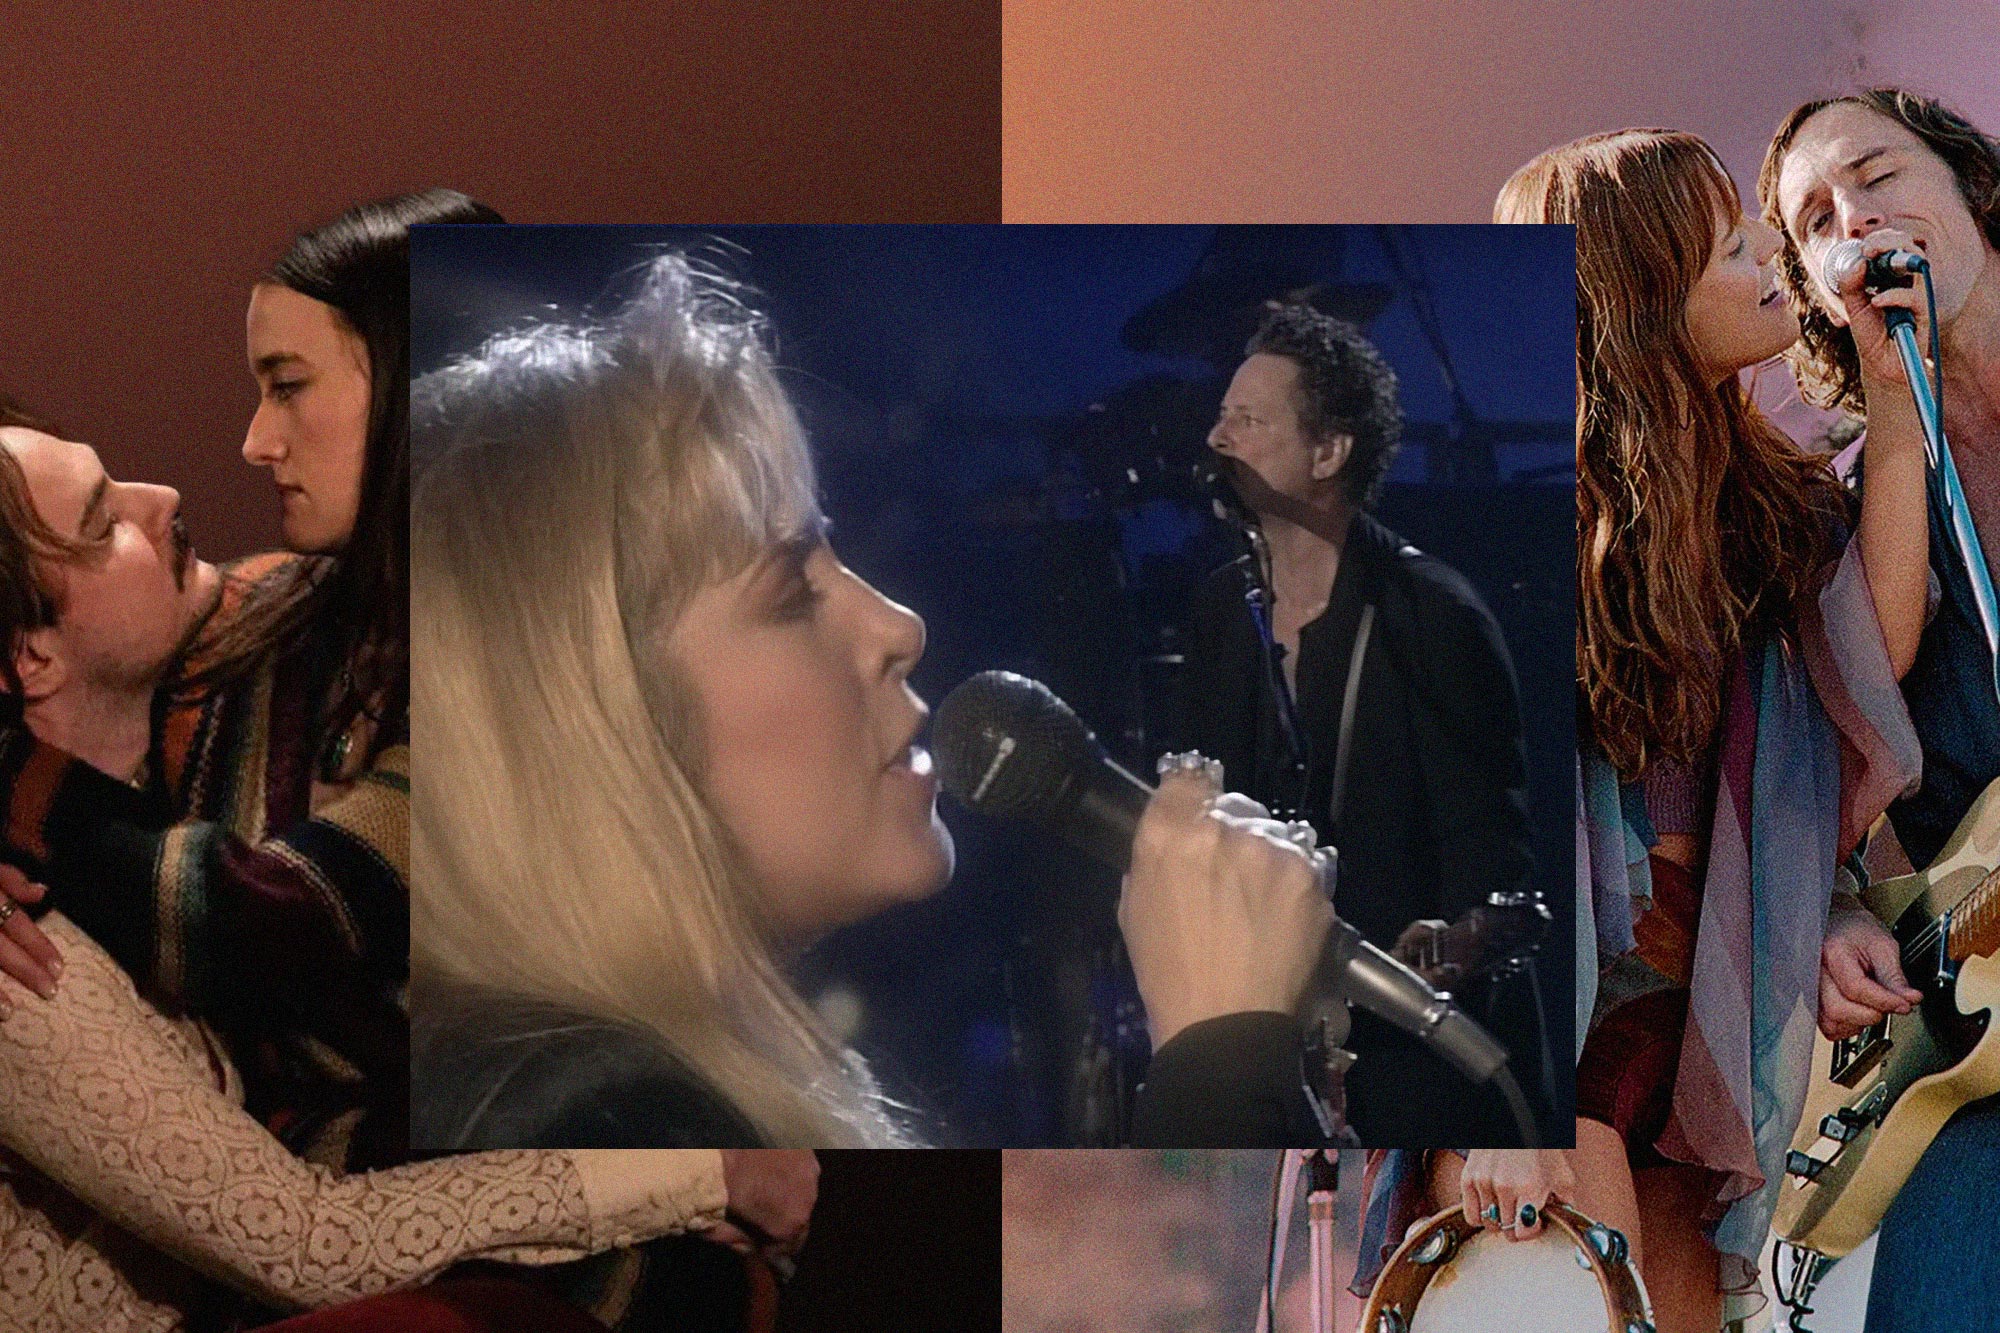 Collage of Stevie Nicks and Lindsey Buckingham in concert, with two fictional couples they helped inspire, in the play Stereophonic and the TV show Daisy Jones and the Six.